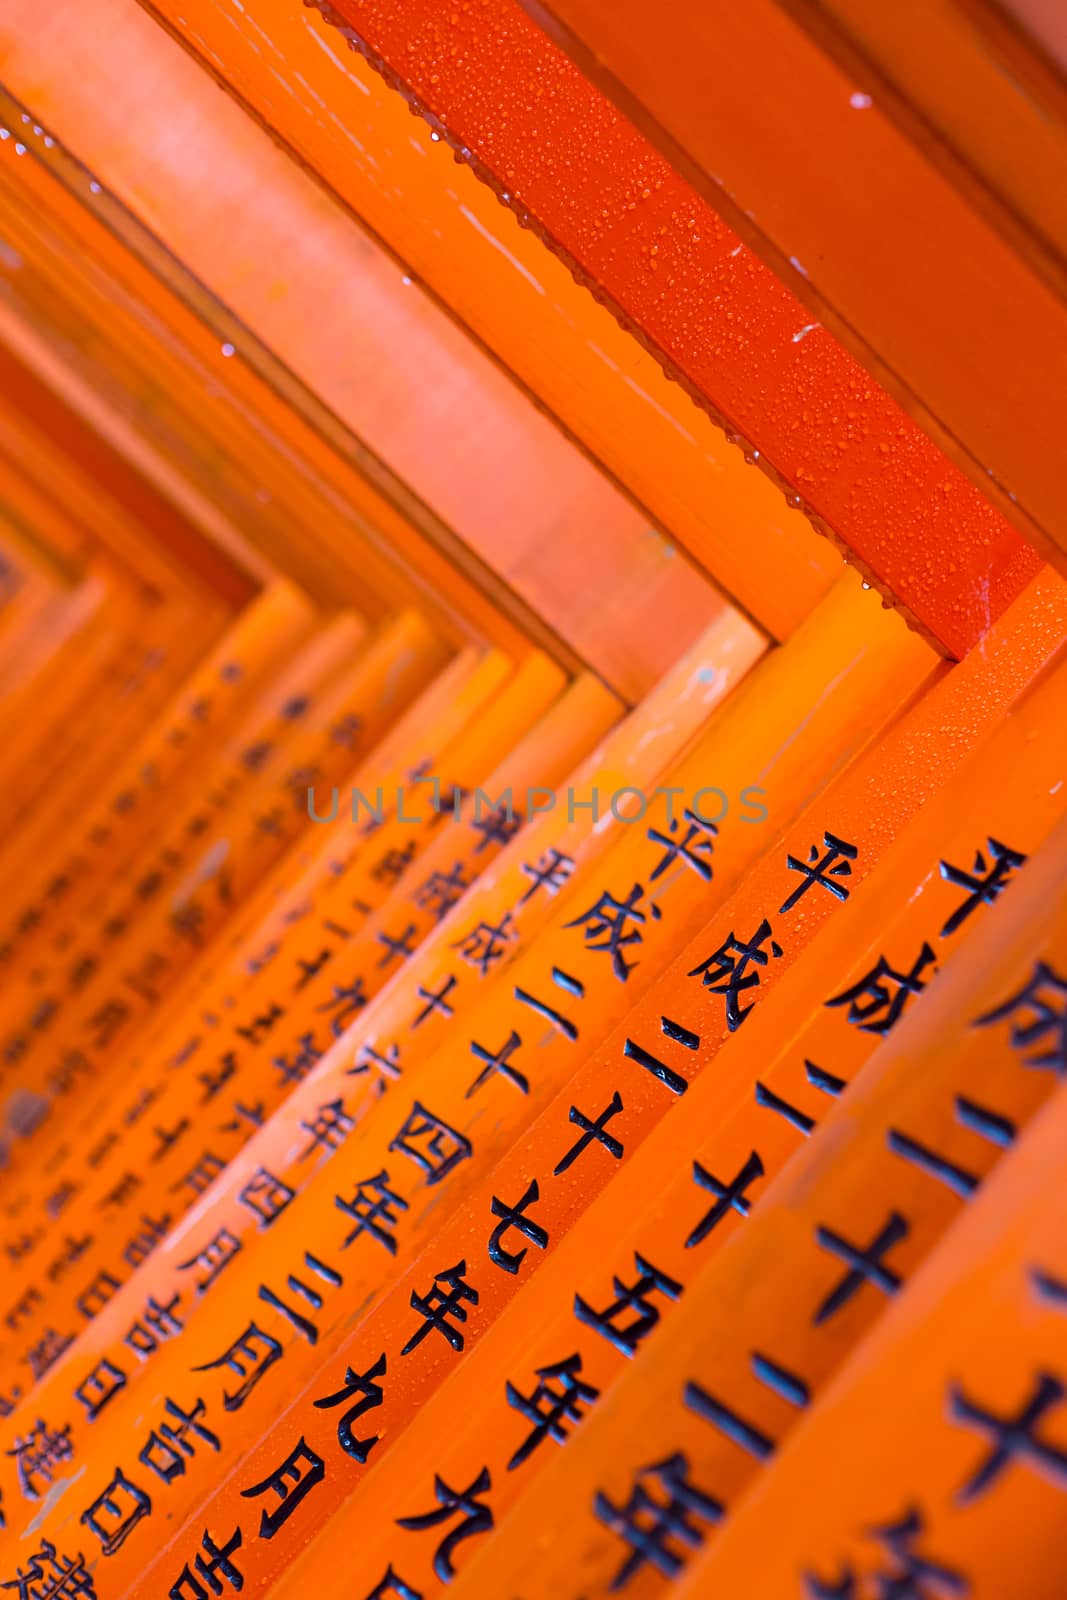 Red wooden Tori Gate at Fushimi Inari Shrine in Kyoto, Japan. Selective focus on traditional japanese writing.